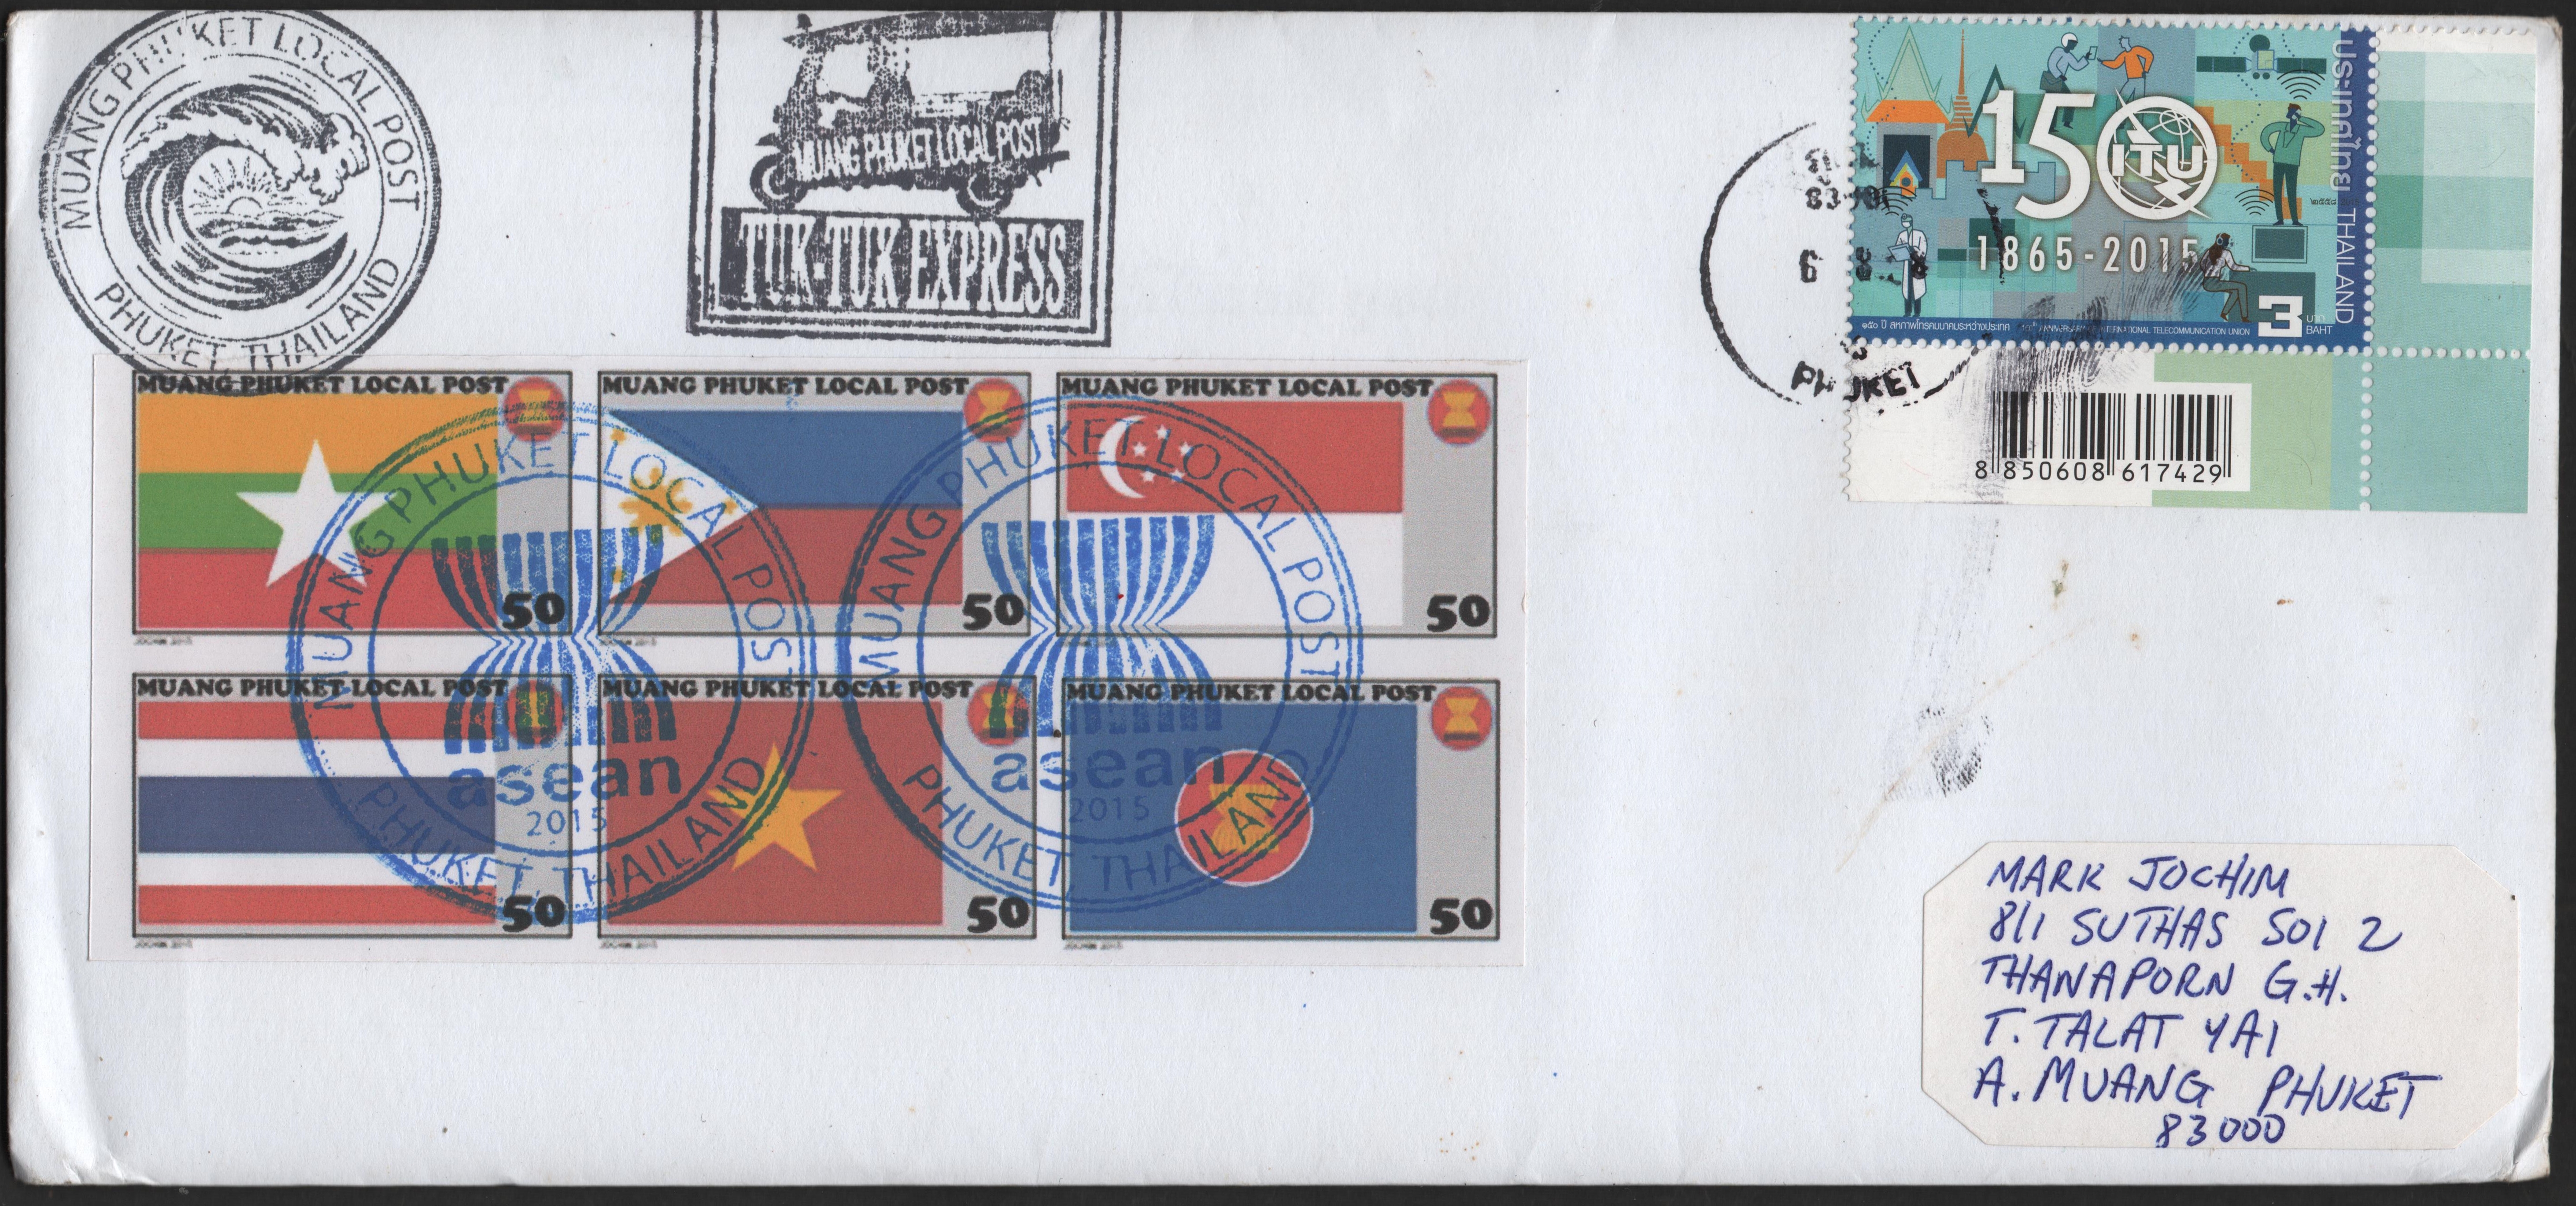 Muang Phuket Local Post – MPLP #21-26 (2015) on first day cover